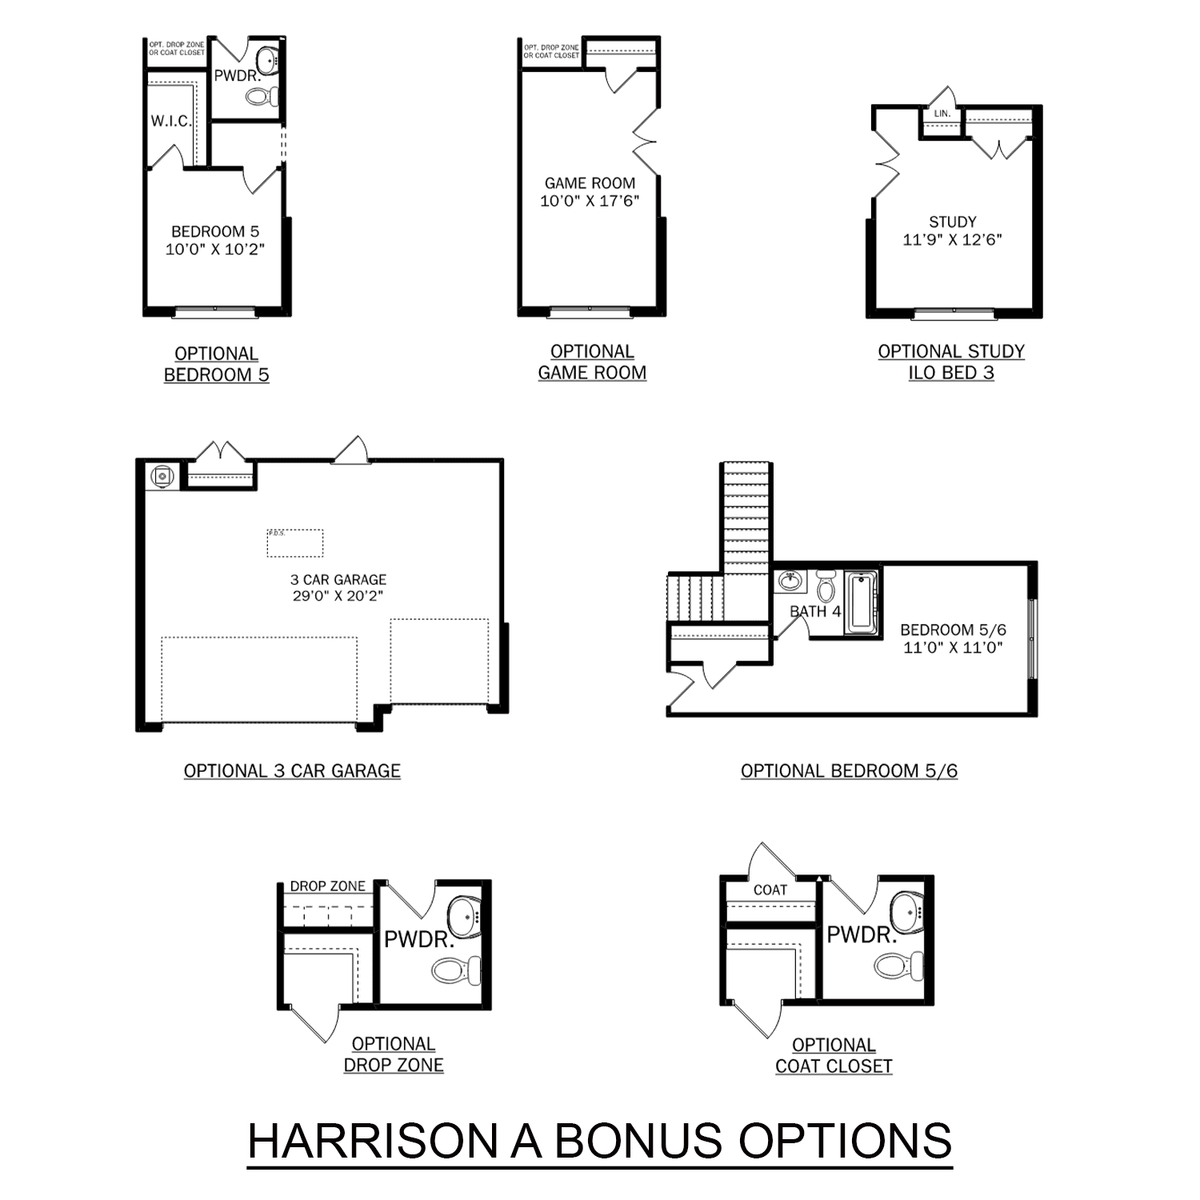 3 - The Harrison with Bonus buildable floor plan layout in Davidson Homes' River Road Estates community.